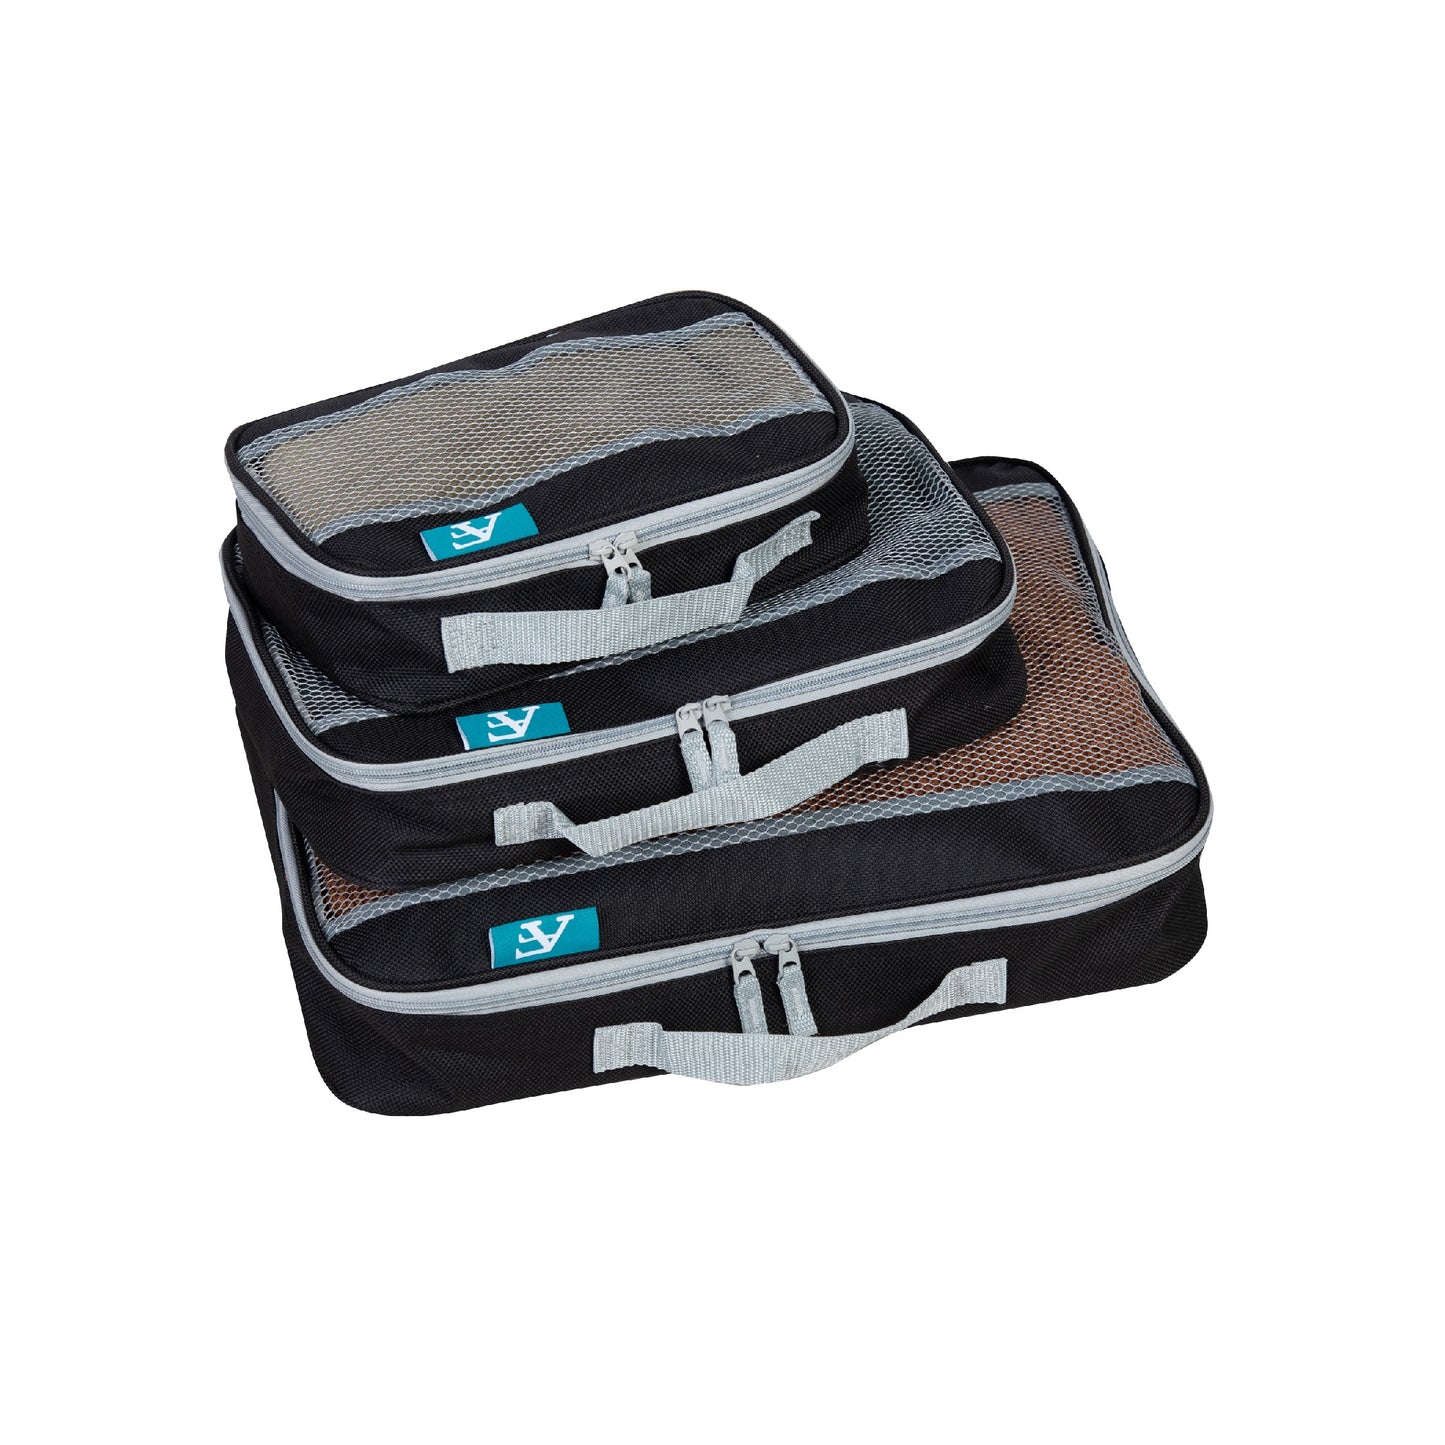 American Flyer South West Packing Cubes - 3-Piece Set